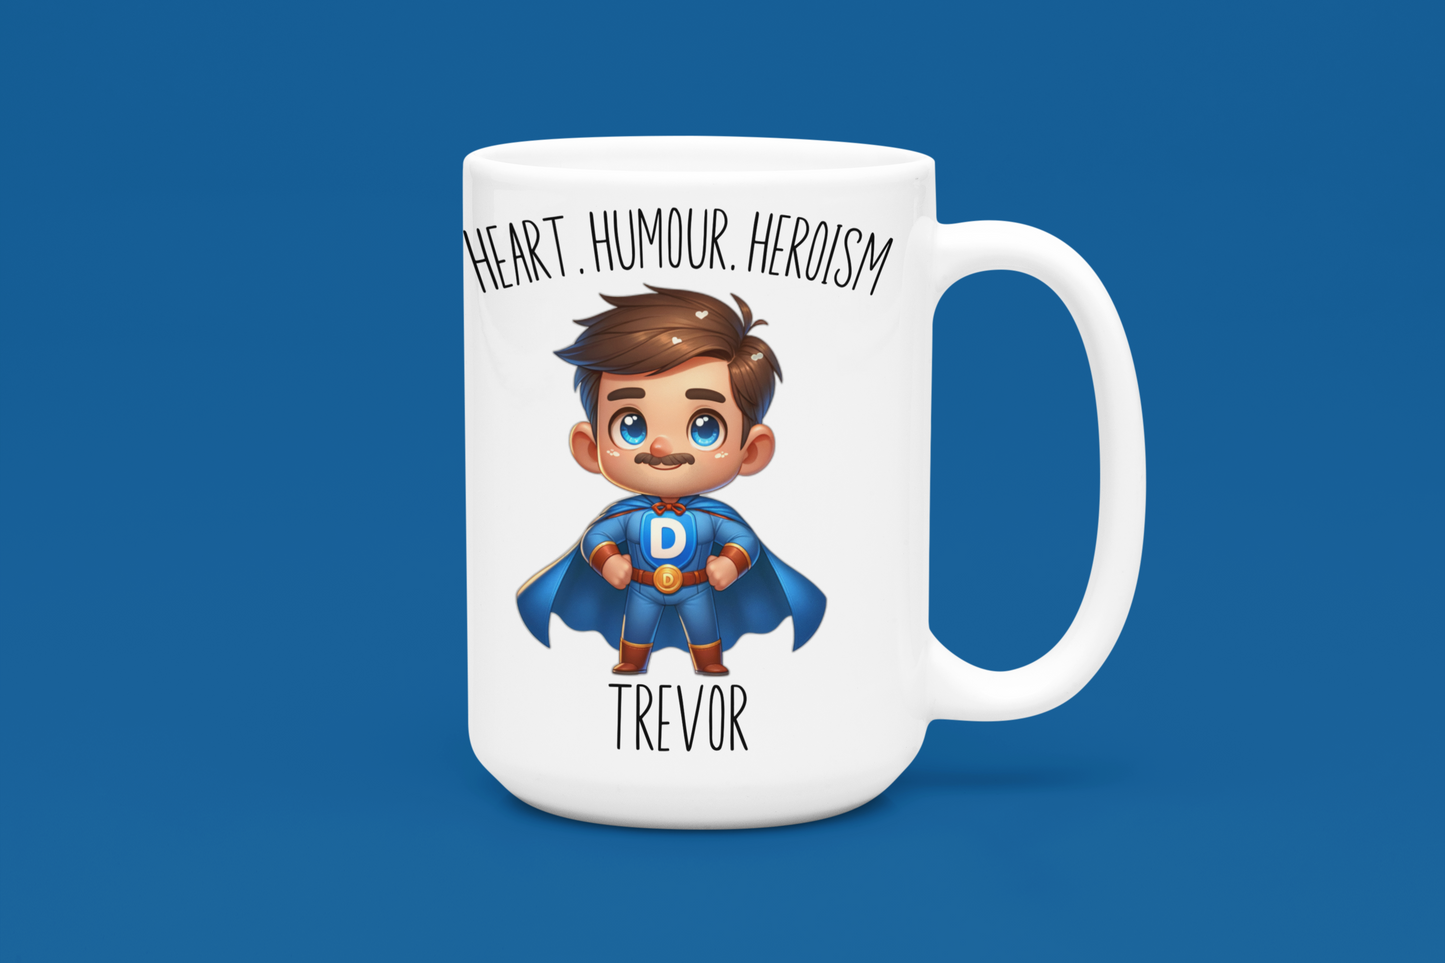 Super Dad Personalised Mug - Heroic Father's Day Gift, Customisable Name, Funny Mugs for Dads, Personalised Gifts for Him